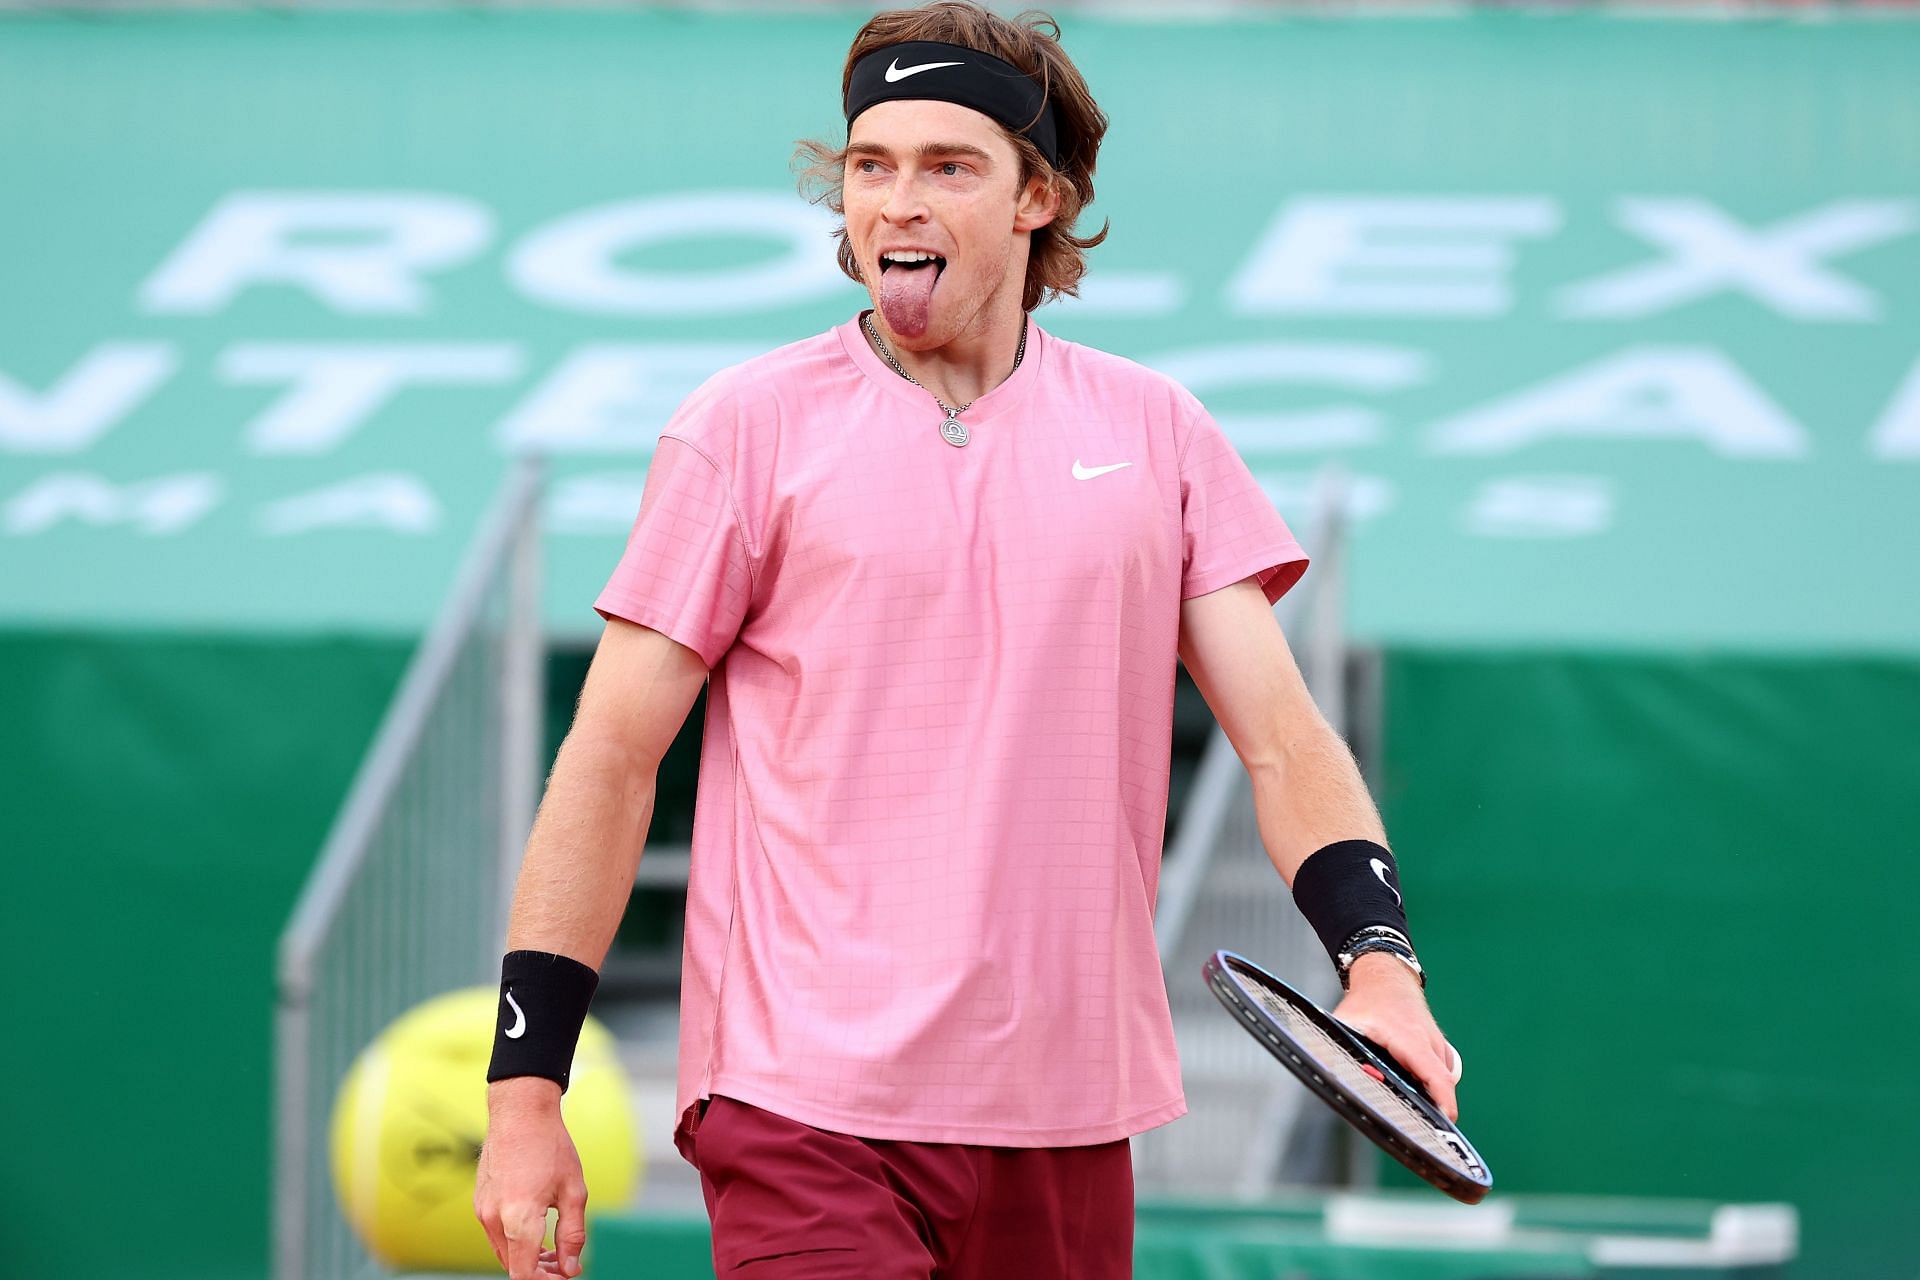 Andrey Rublev joked about tough draws